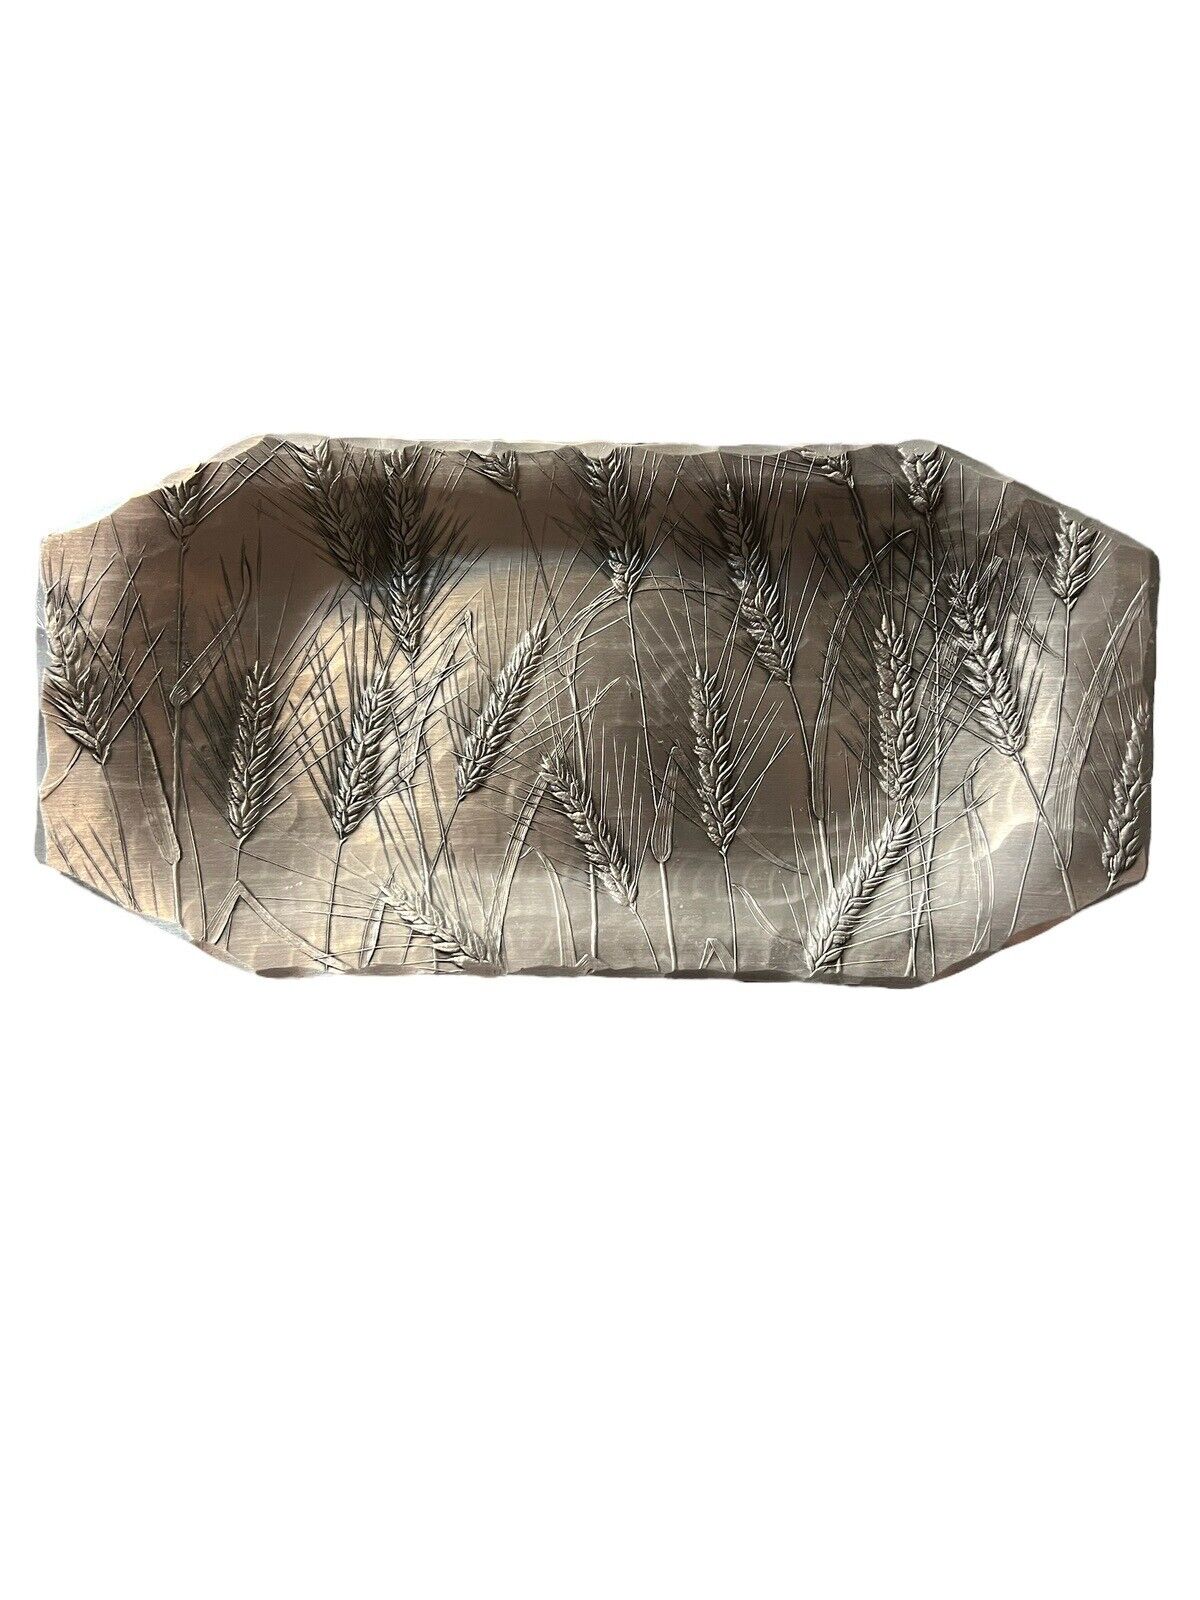 Vintage Wendell August Forge Hammered Aluminum Bread Tray, Wheat Pattern